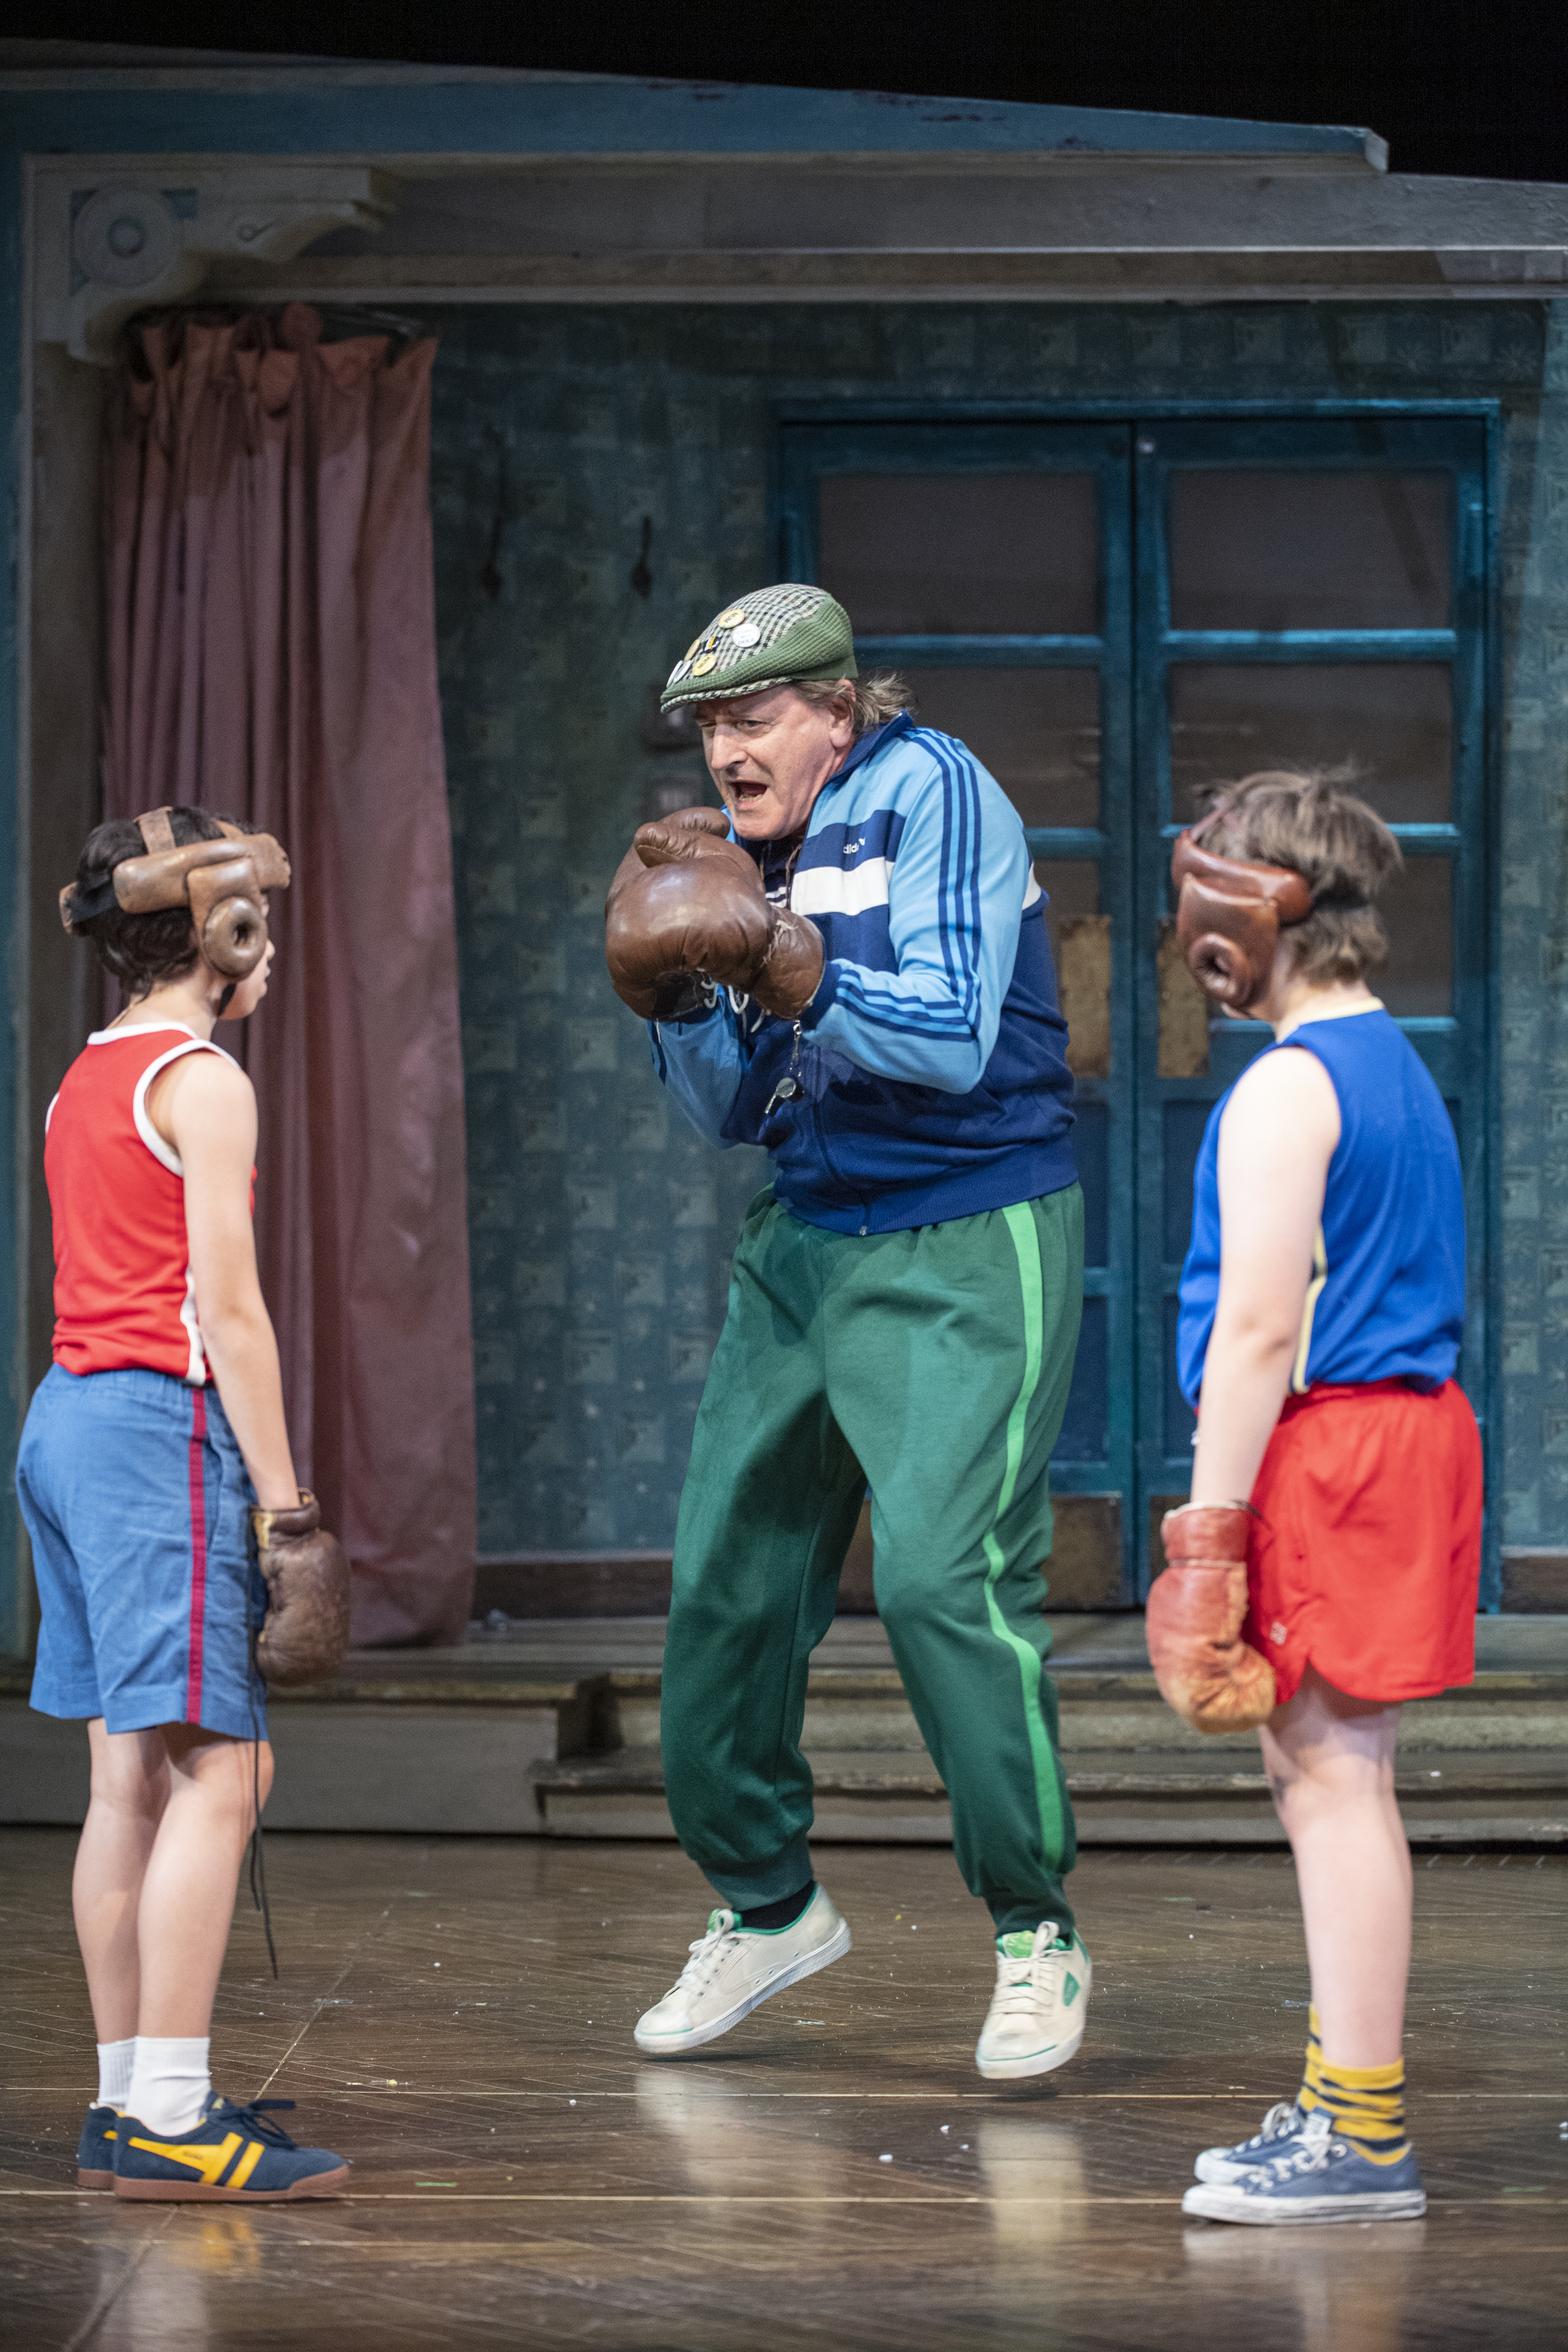 Billy Elliot the Musical. Photographed by James D Morgan. Image supplied